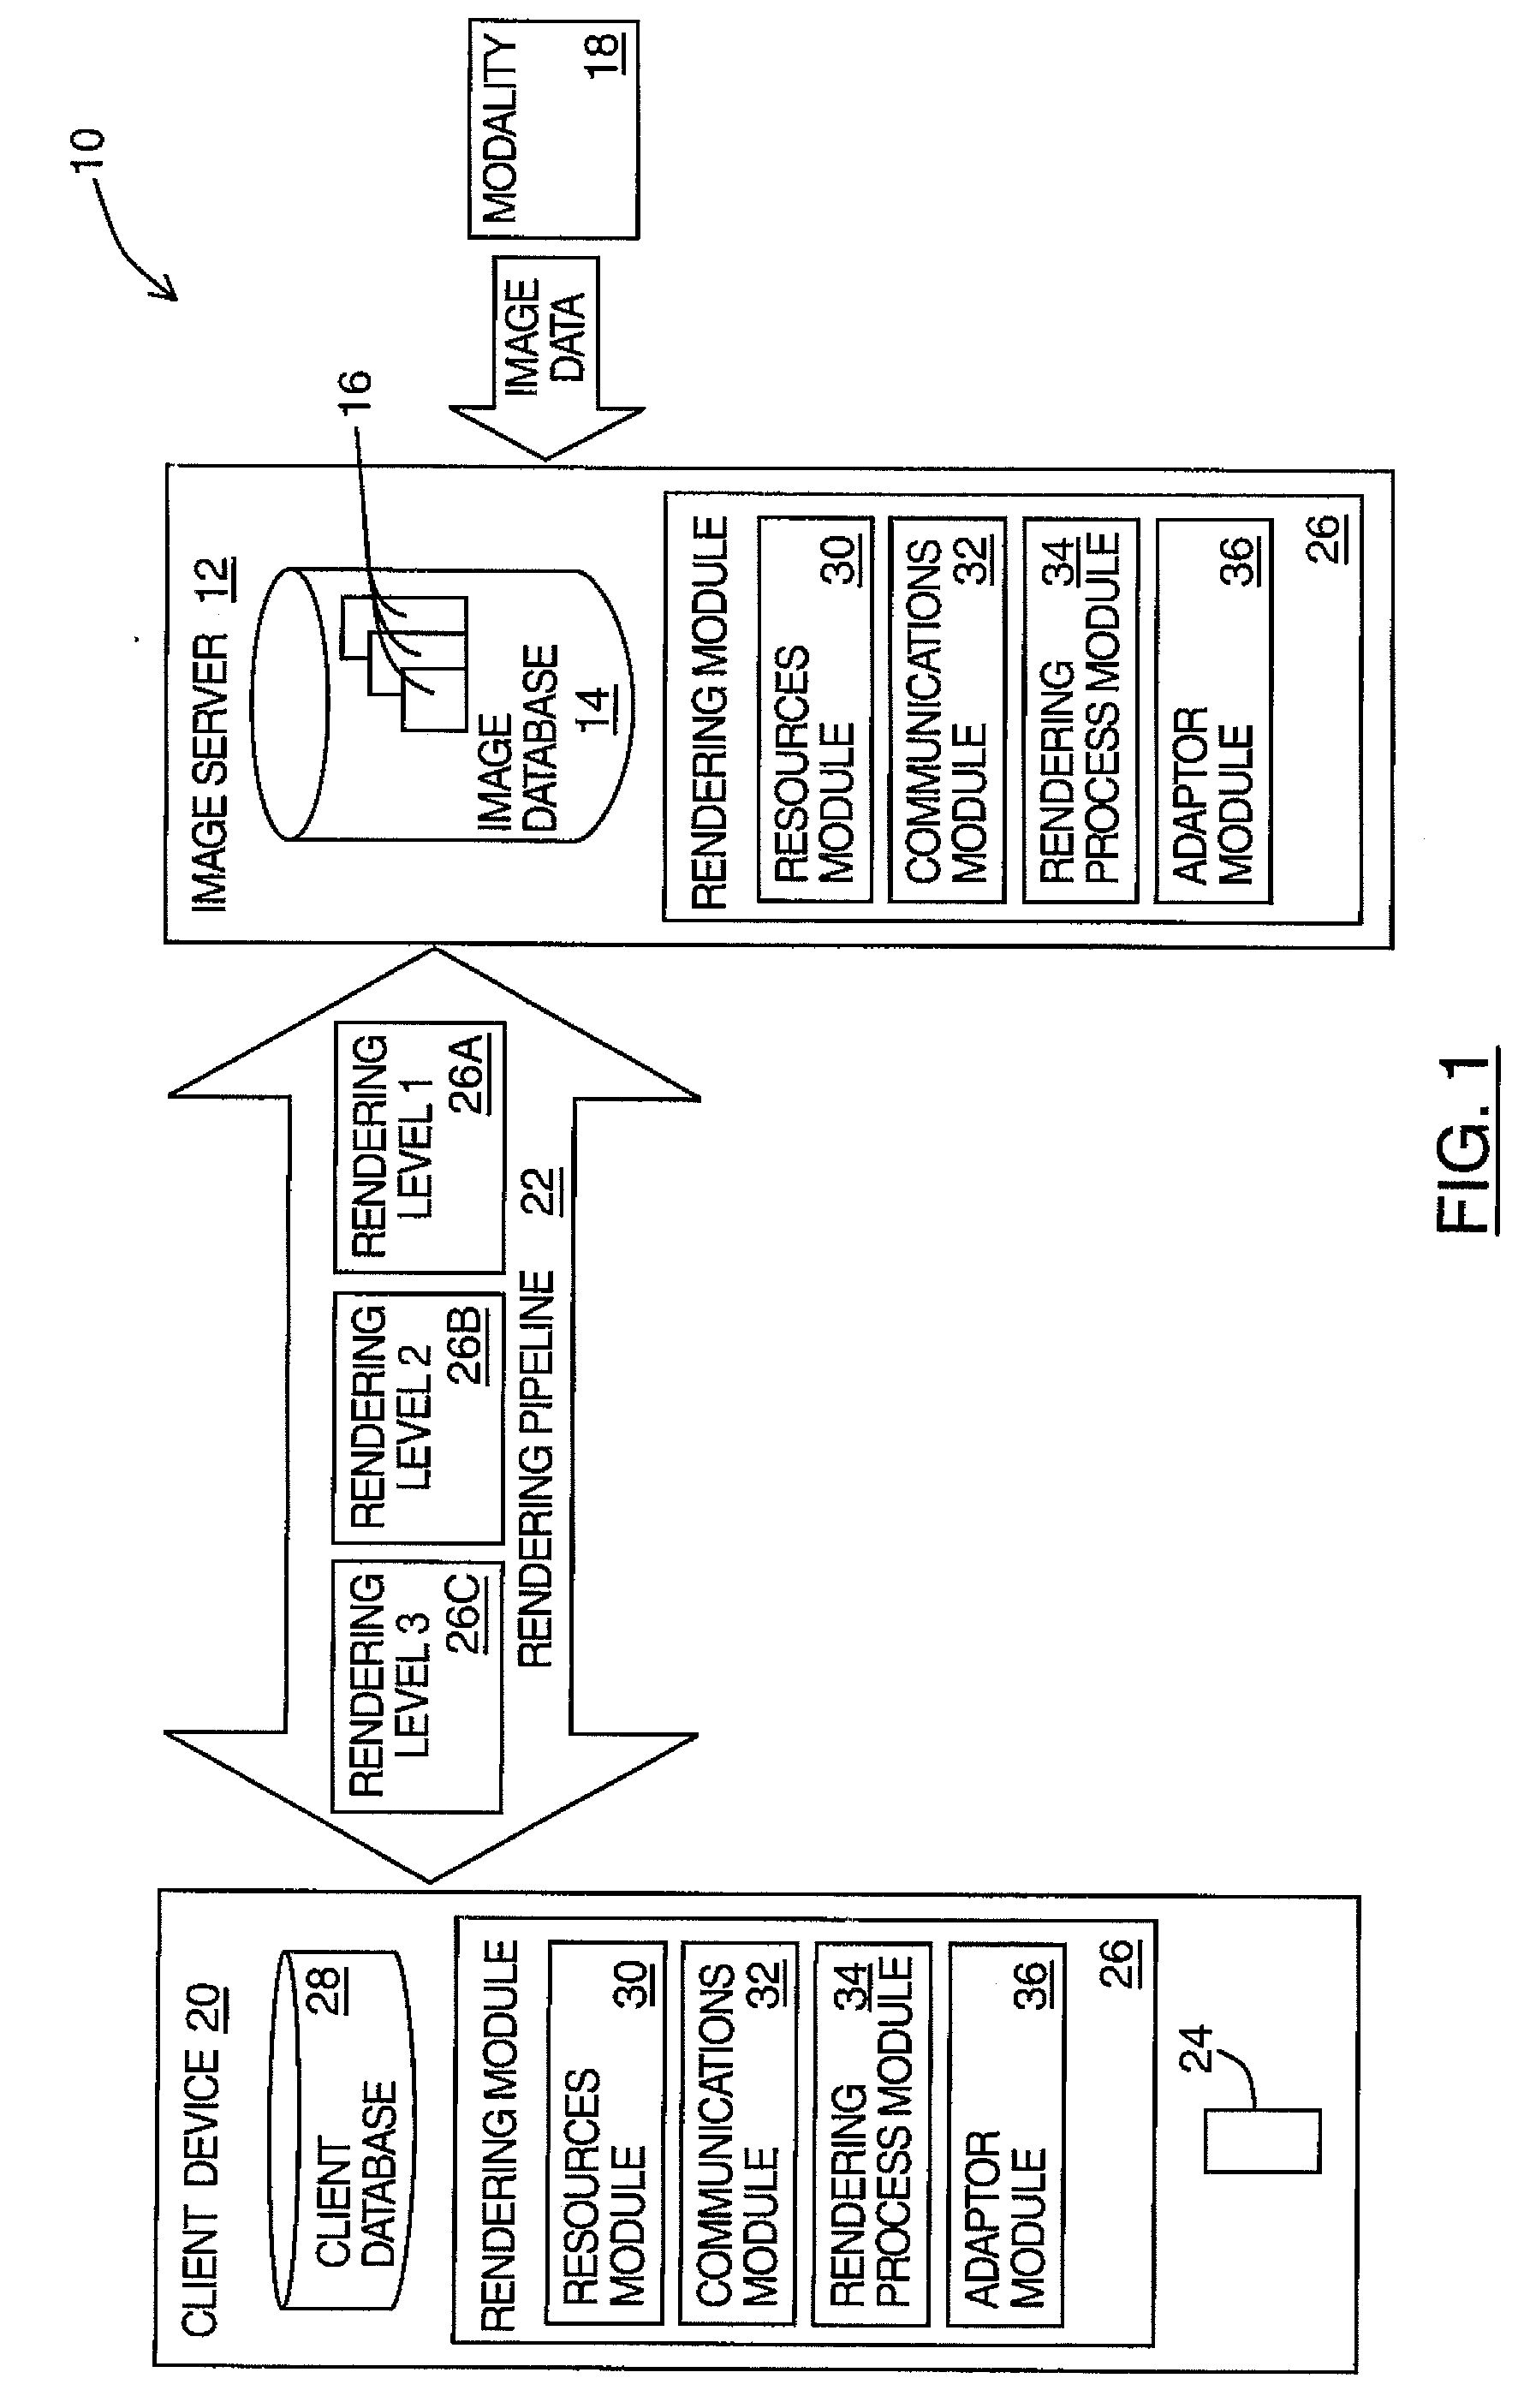 Method and System for Dynamic Image Processing